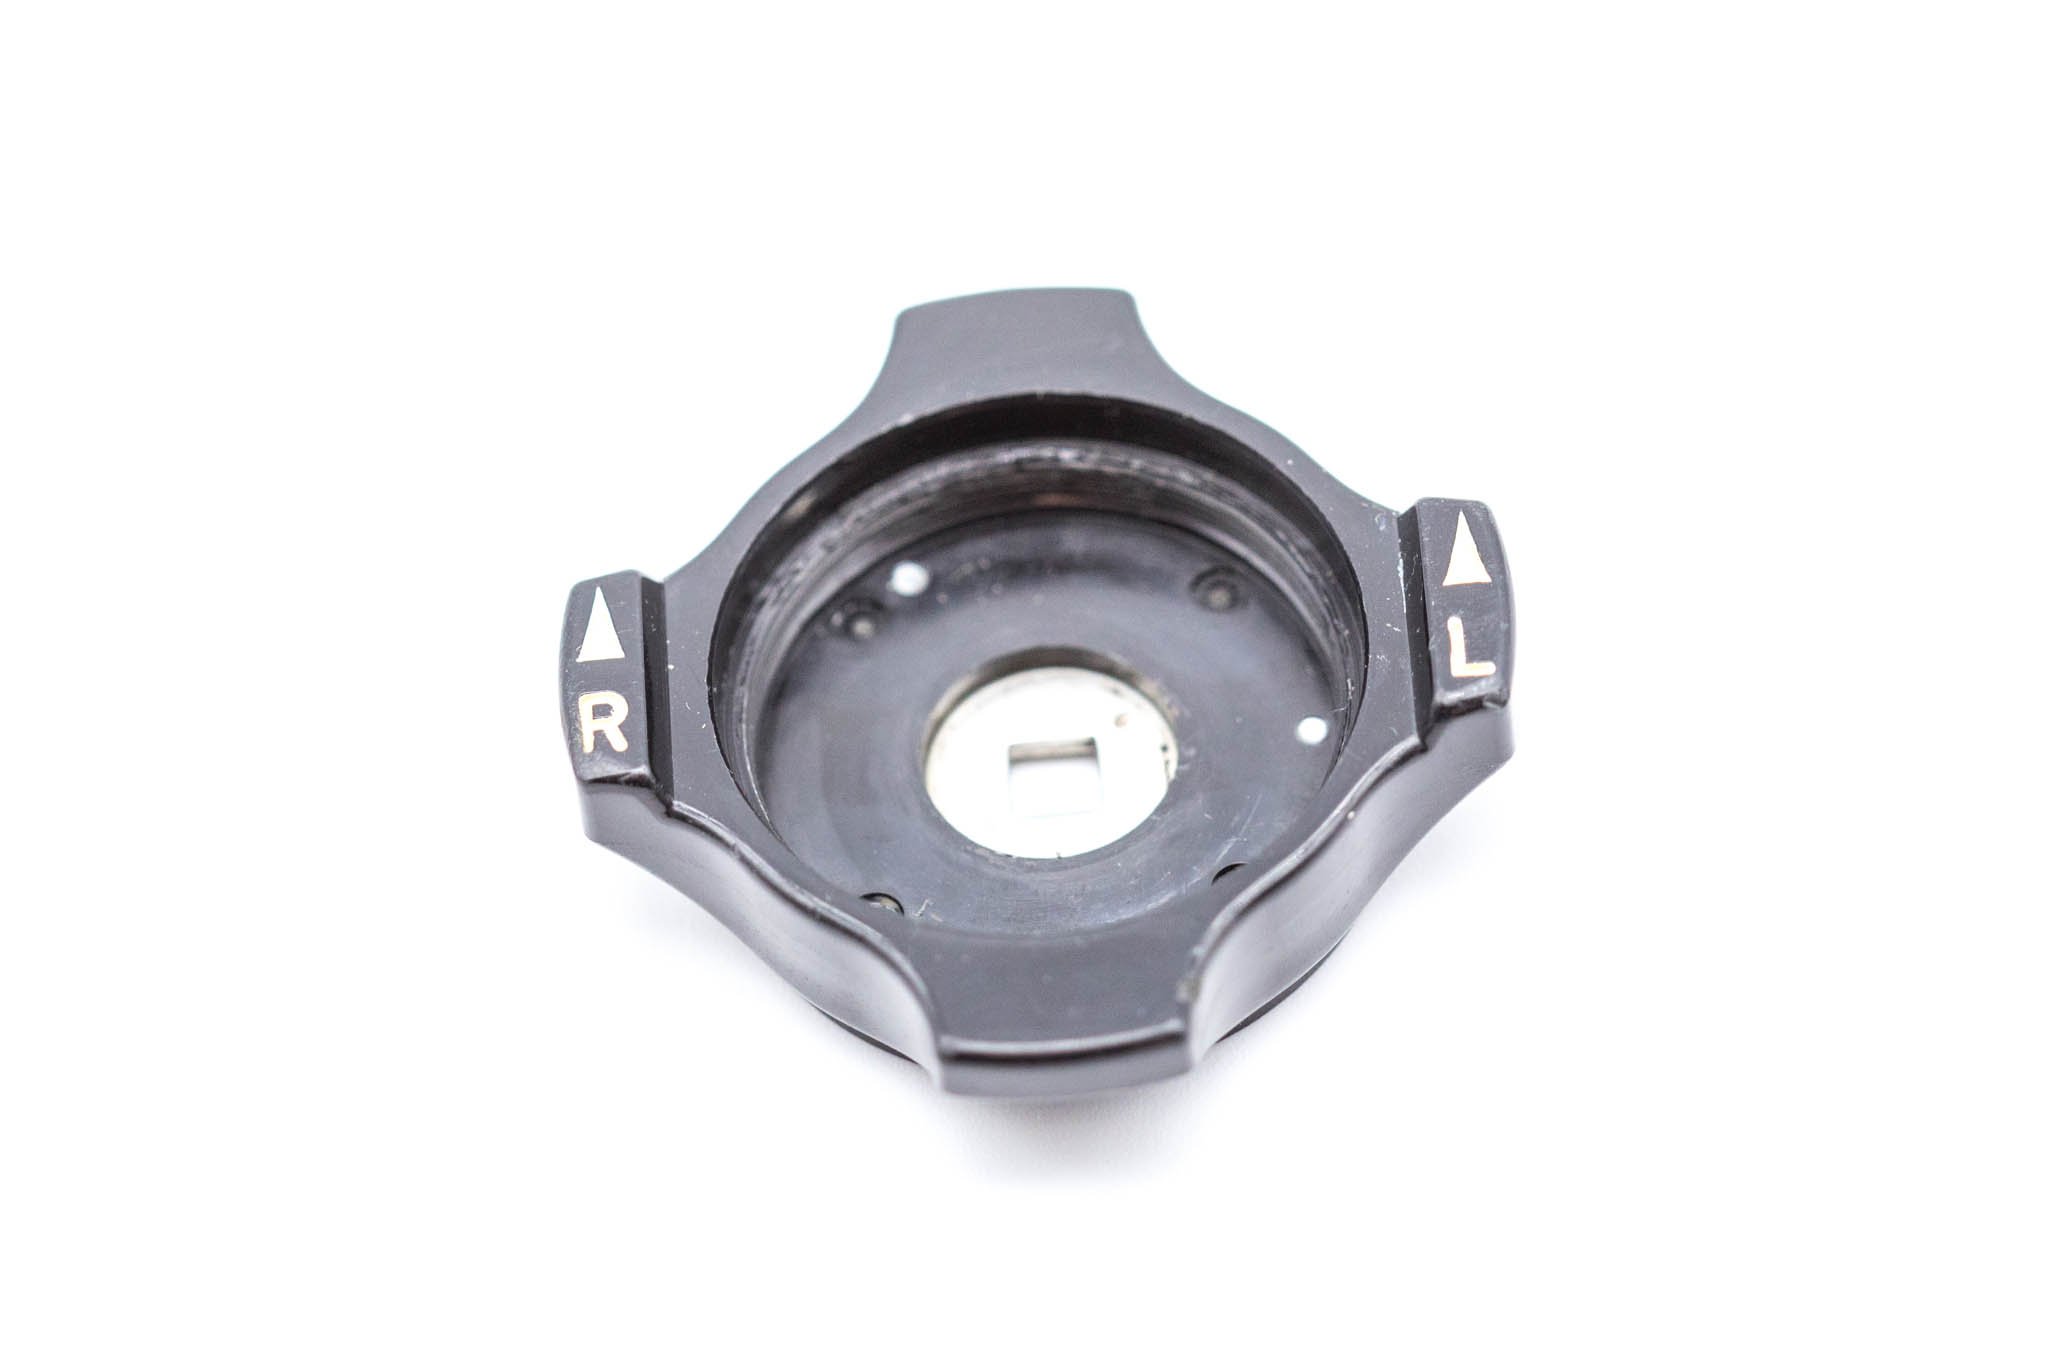 OEM Control Knob (Left/Right) Face Cover - OSF, OSF-2, OSF-35